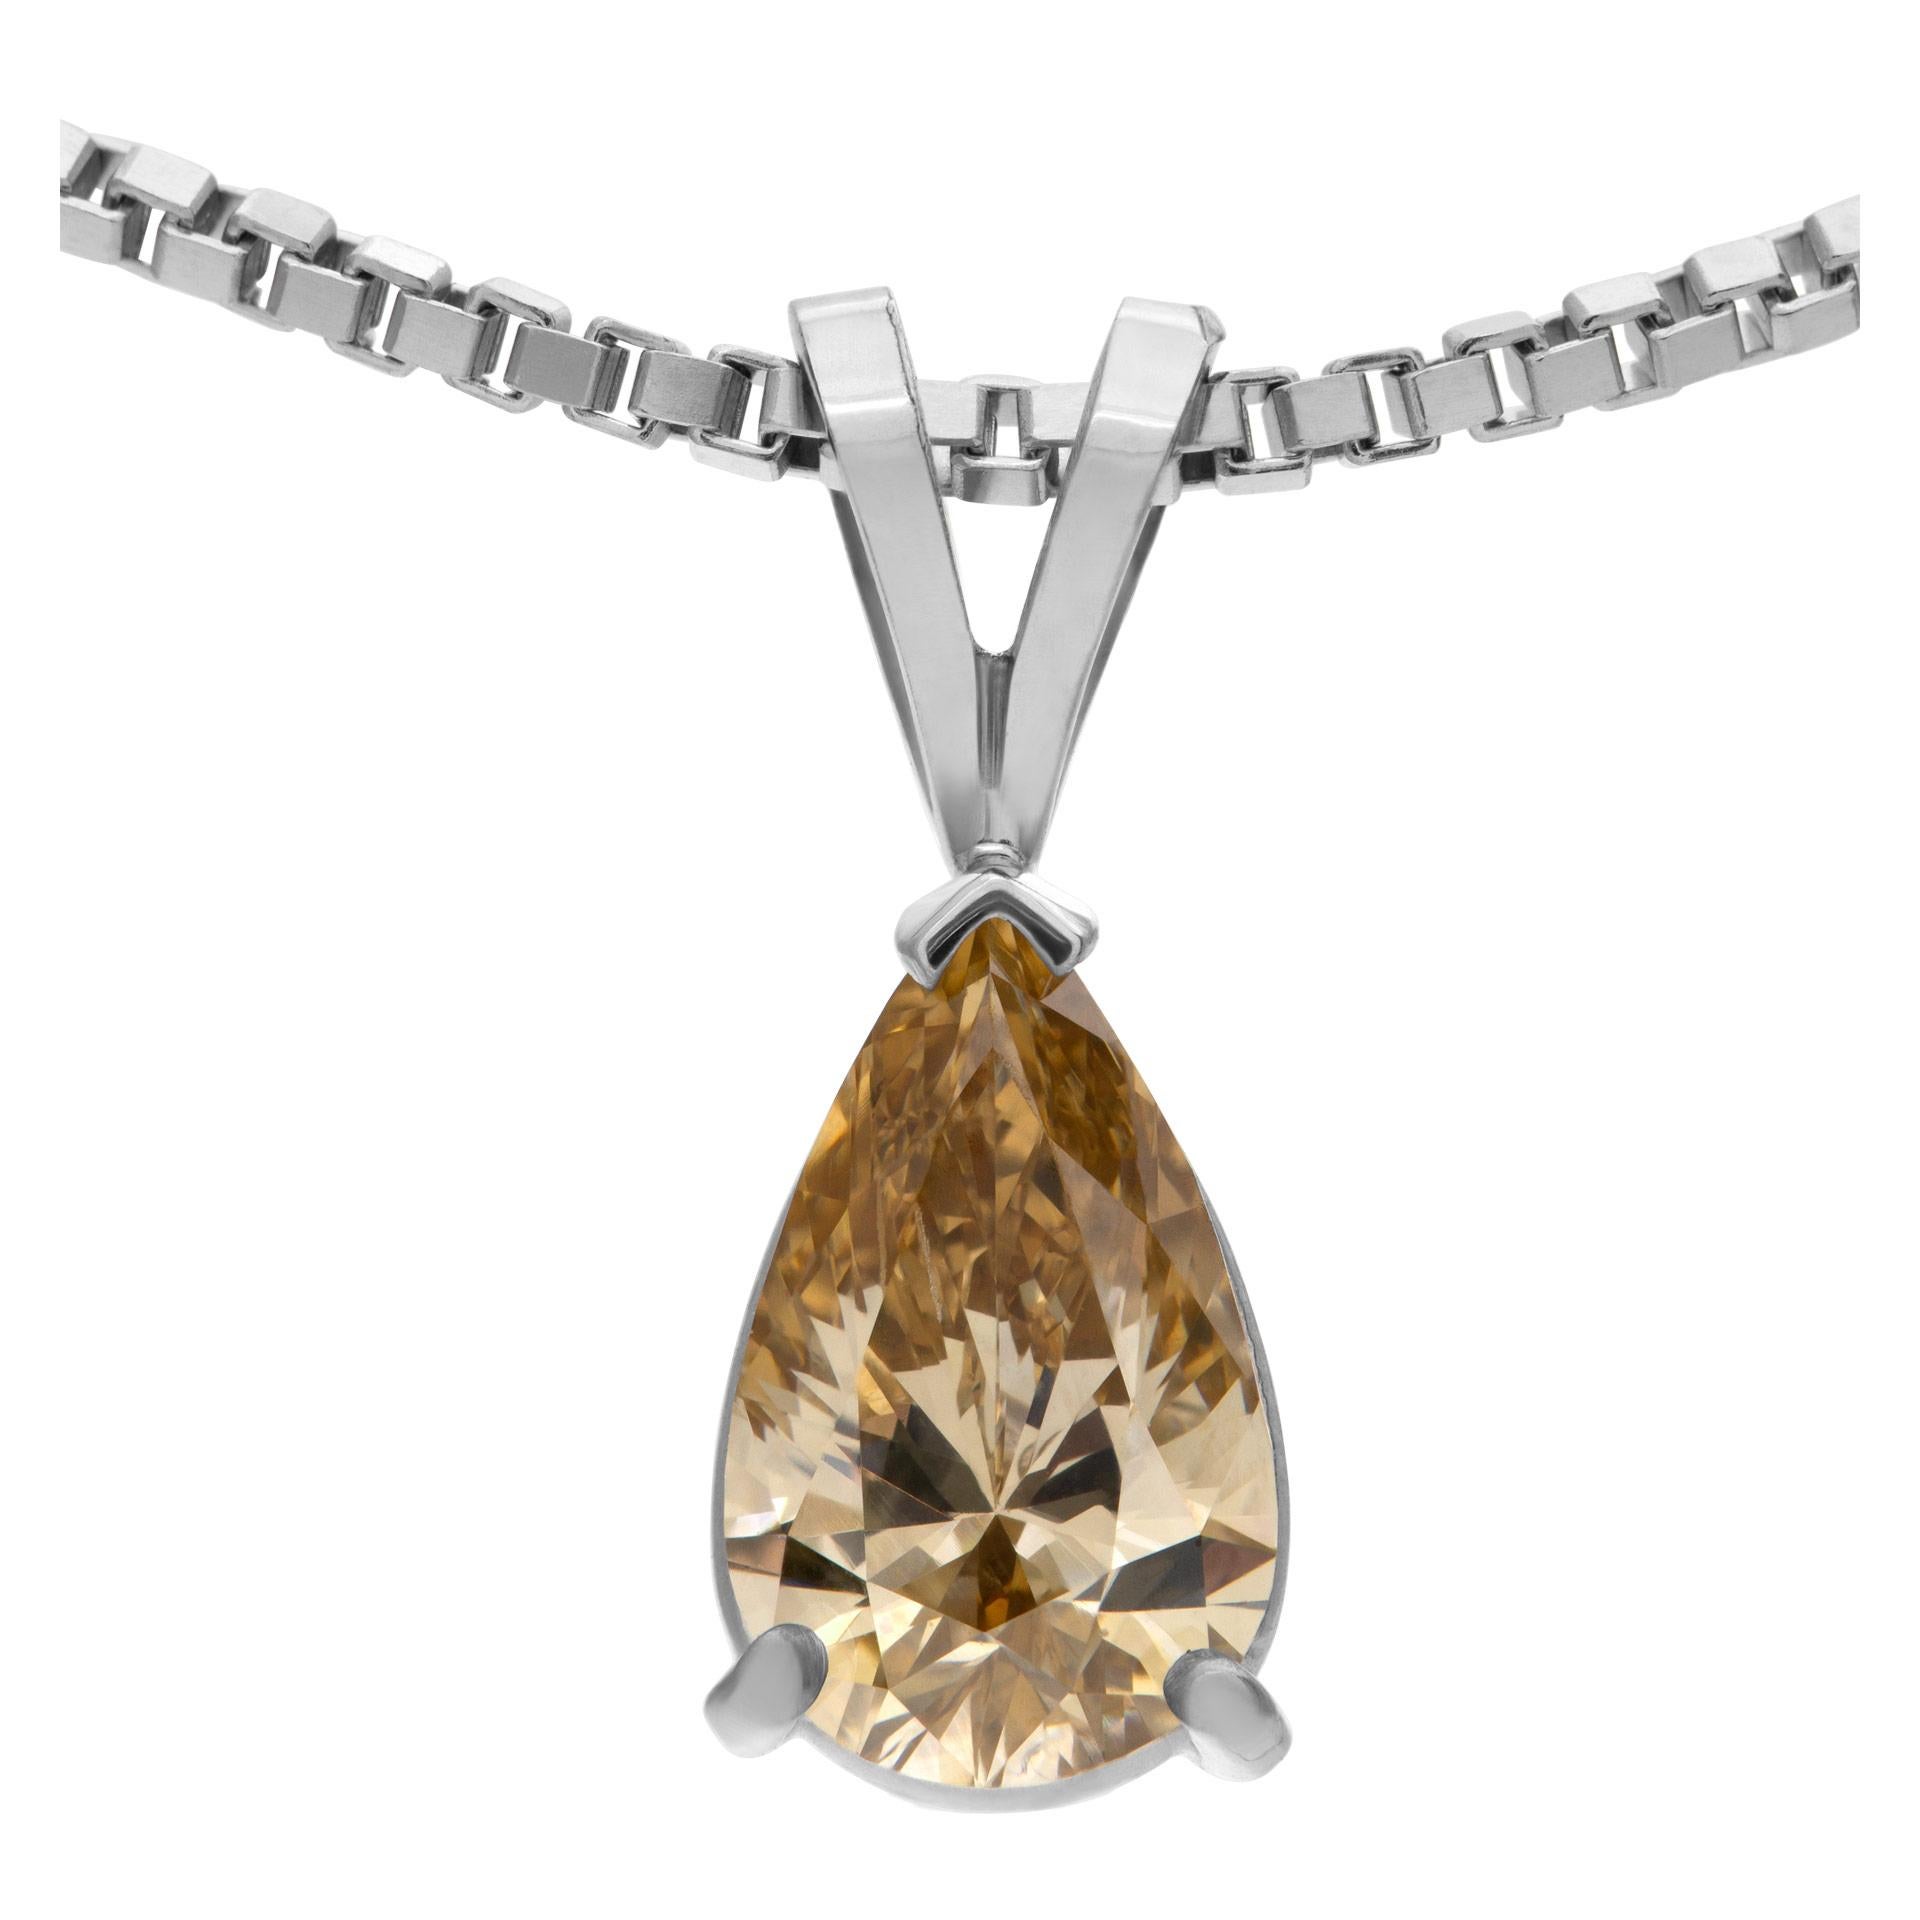 GIA certified 1.11 carat pear cut diamond: Natural, Fancy Brown-Yellow even color, VS1 clarity, set in white gold pendant, on a 15